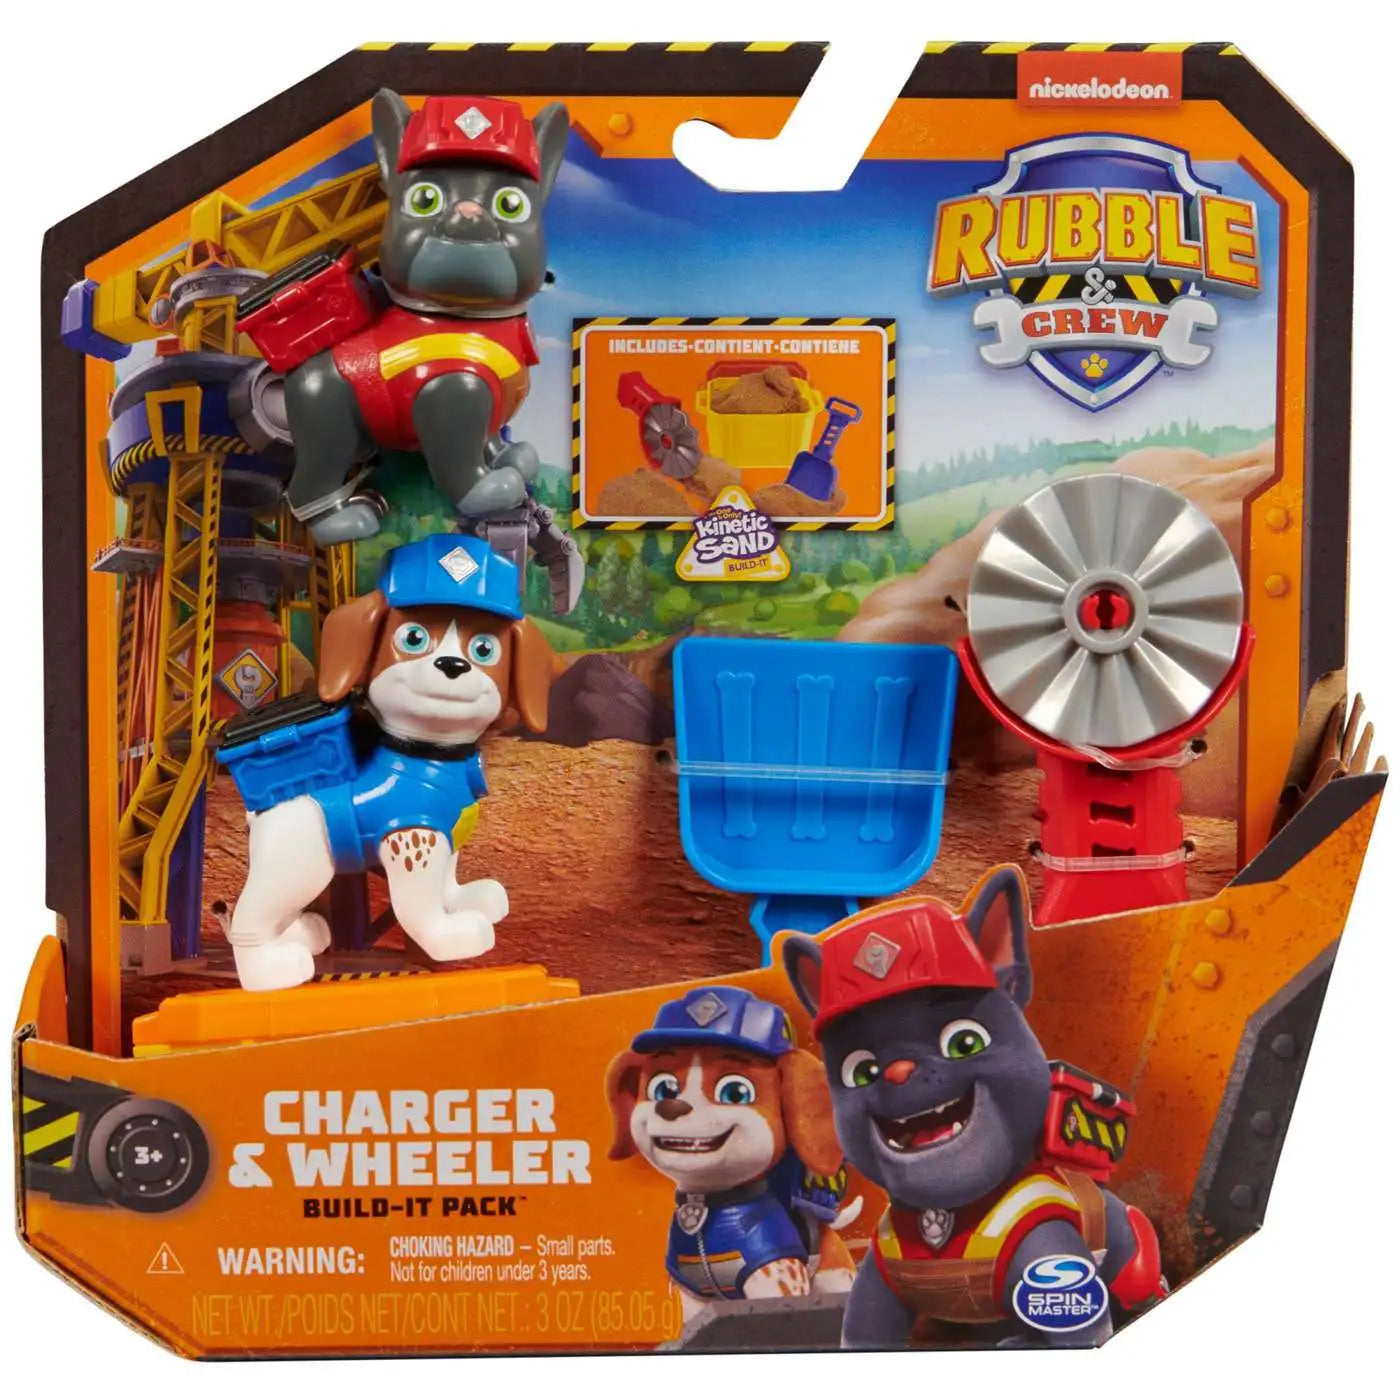 RUBBLE & CREW - CHARGER AND WHEELER BUILD-IT TWO PACK